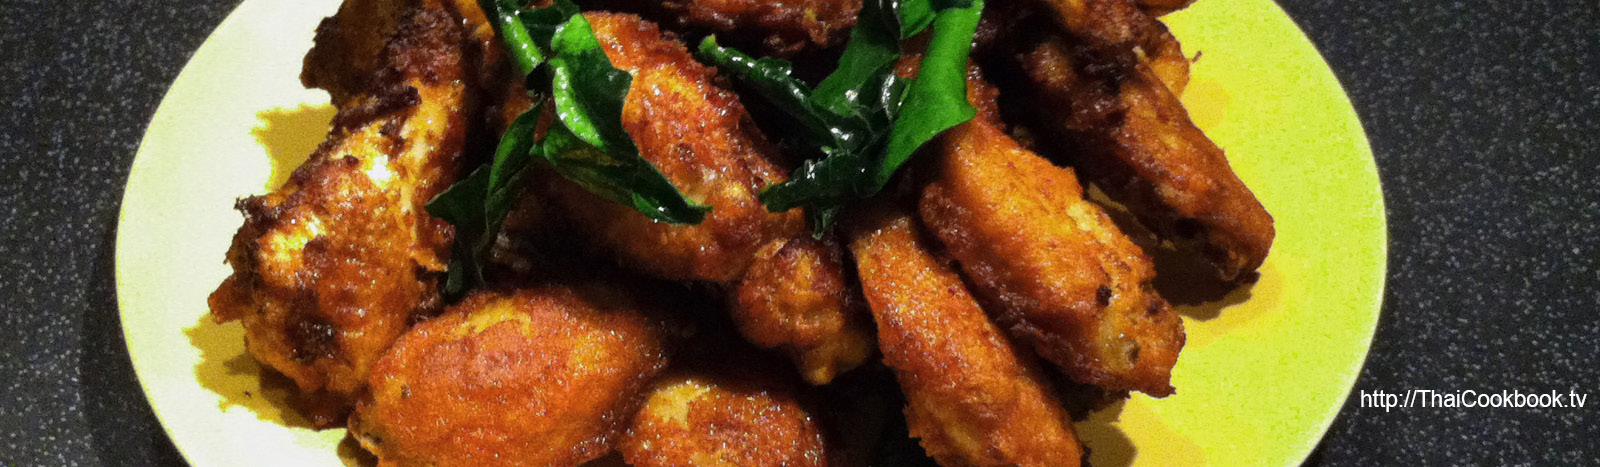 Authentic Thai recipe for Spicy and Salty Fried Chicken Wings